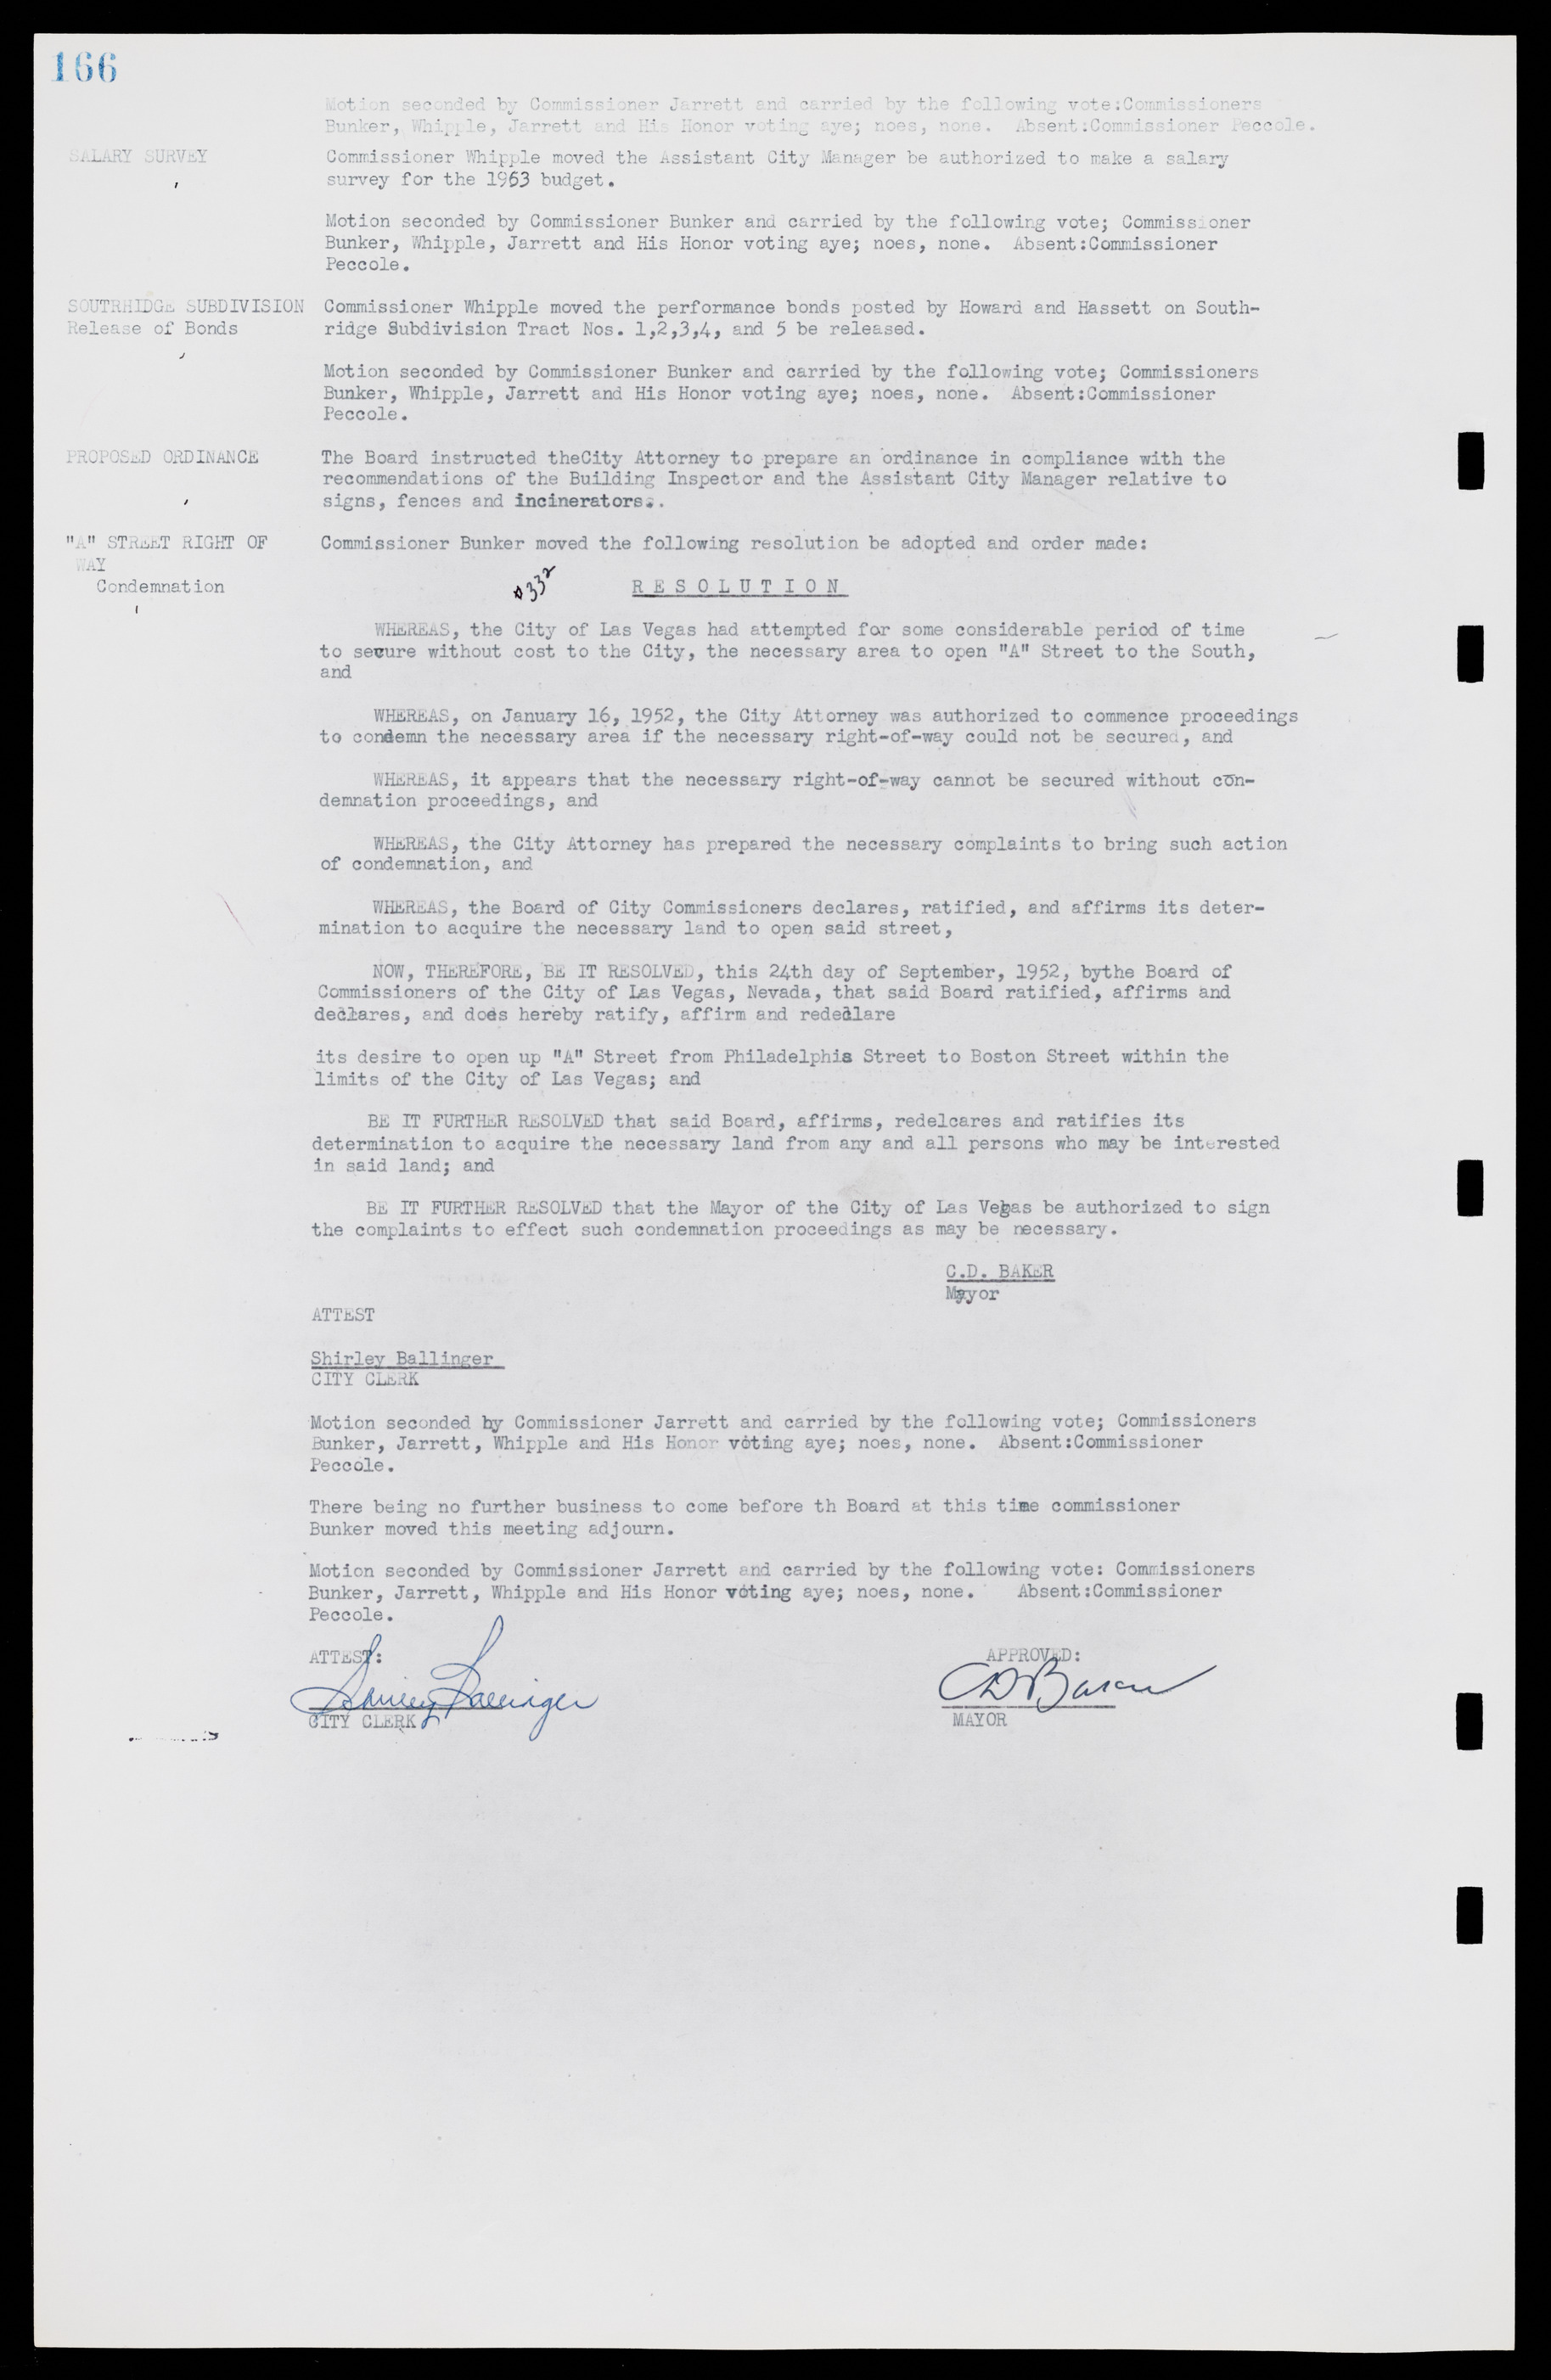 Las Vegas City Commission Minutes, May 26, 1952 to February 17, 1954, lvc000008-180